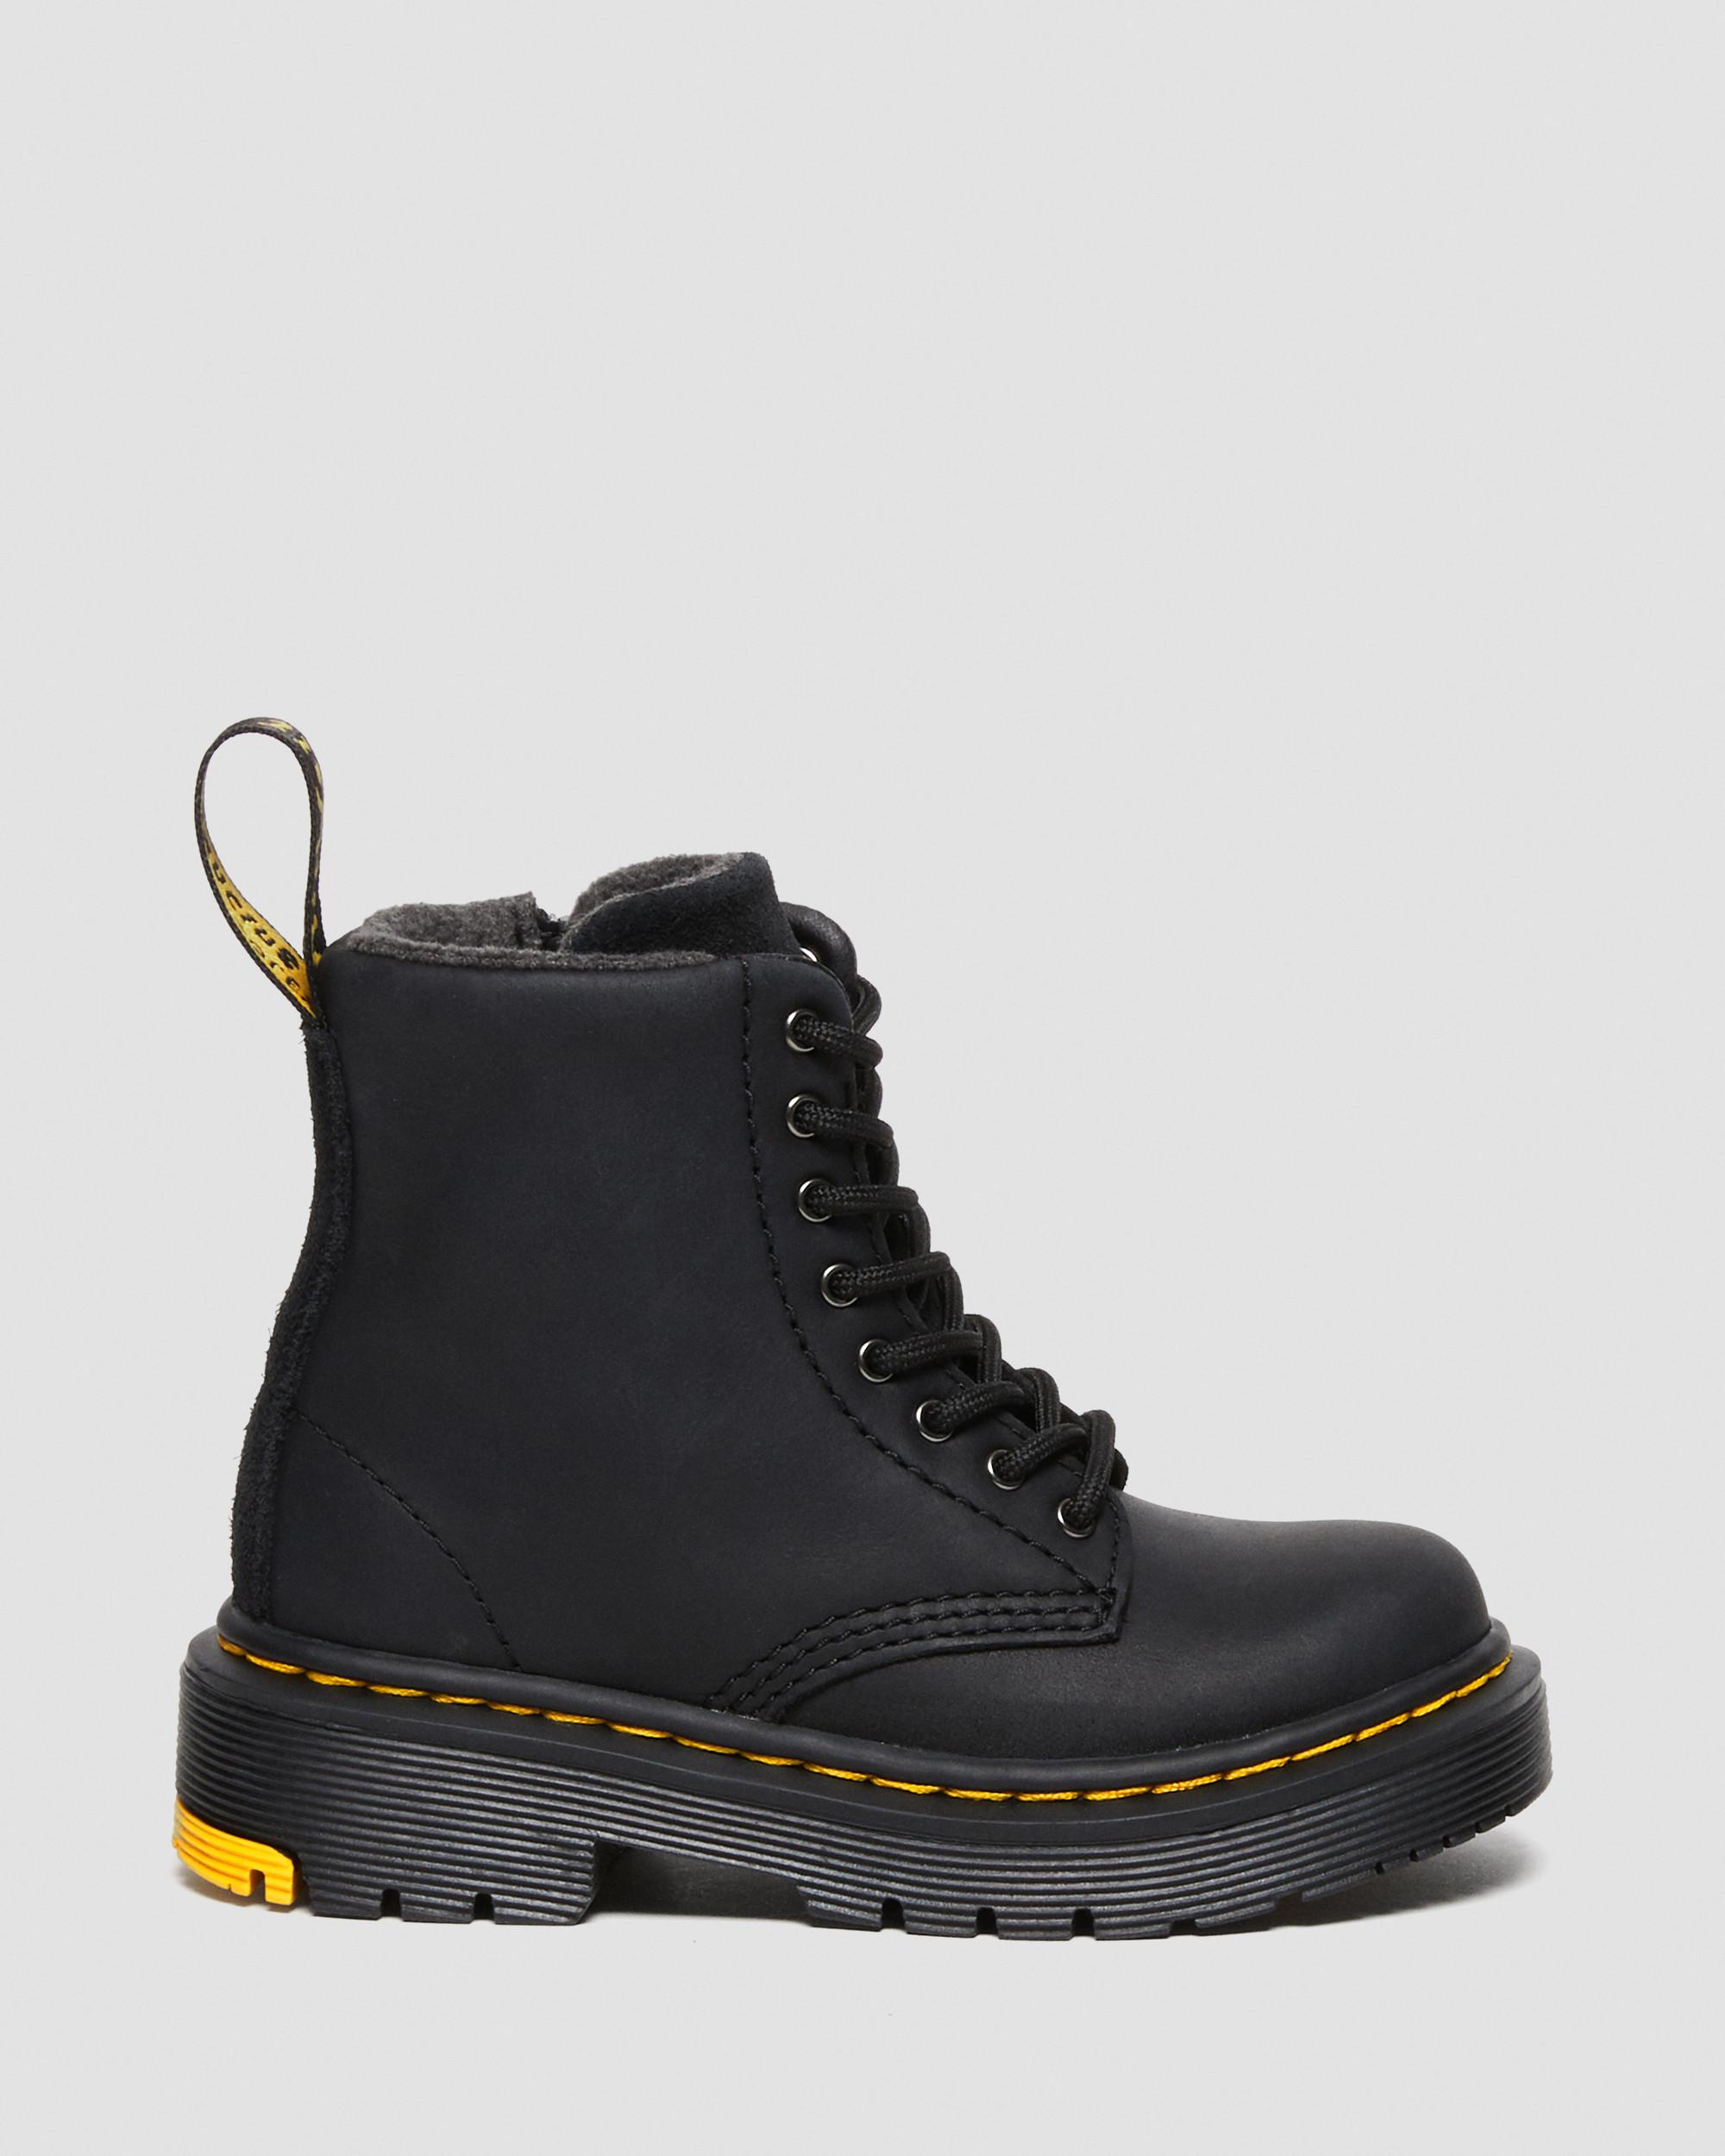 Toddler 1460 Wintergrip Suede Lace Up BootsToddler 1460 Wintergrip Suede Lace Up Boots Dr. Martens